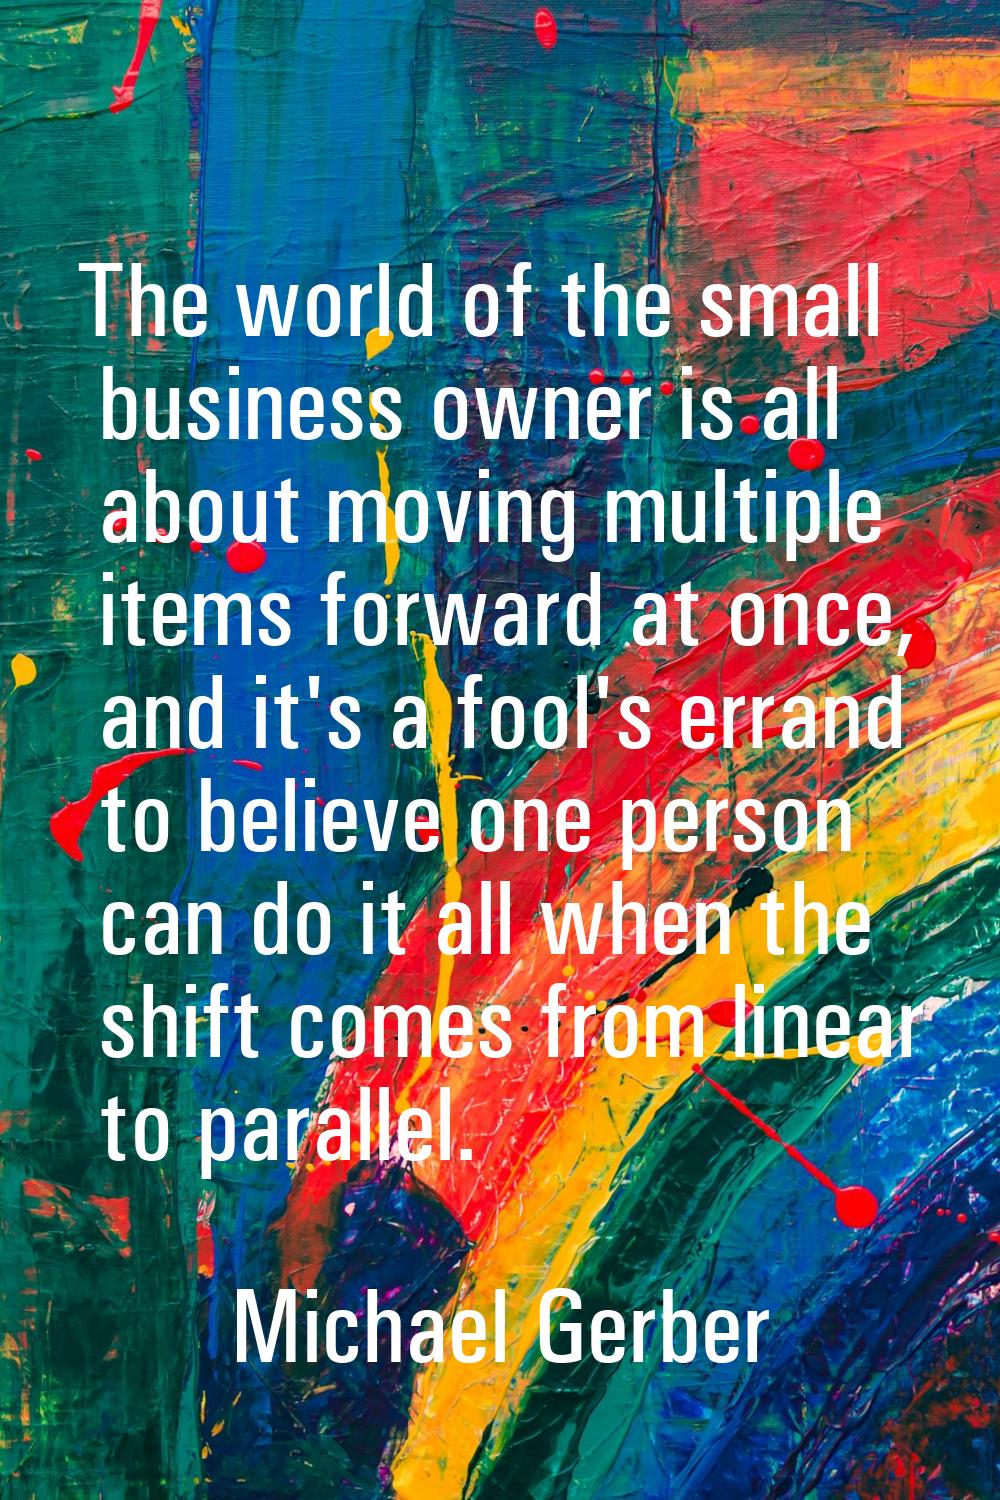 The world of the small business owner is all about moving multiple items forward at once, and it's 